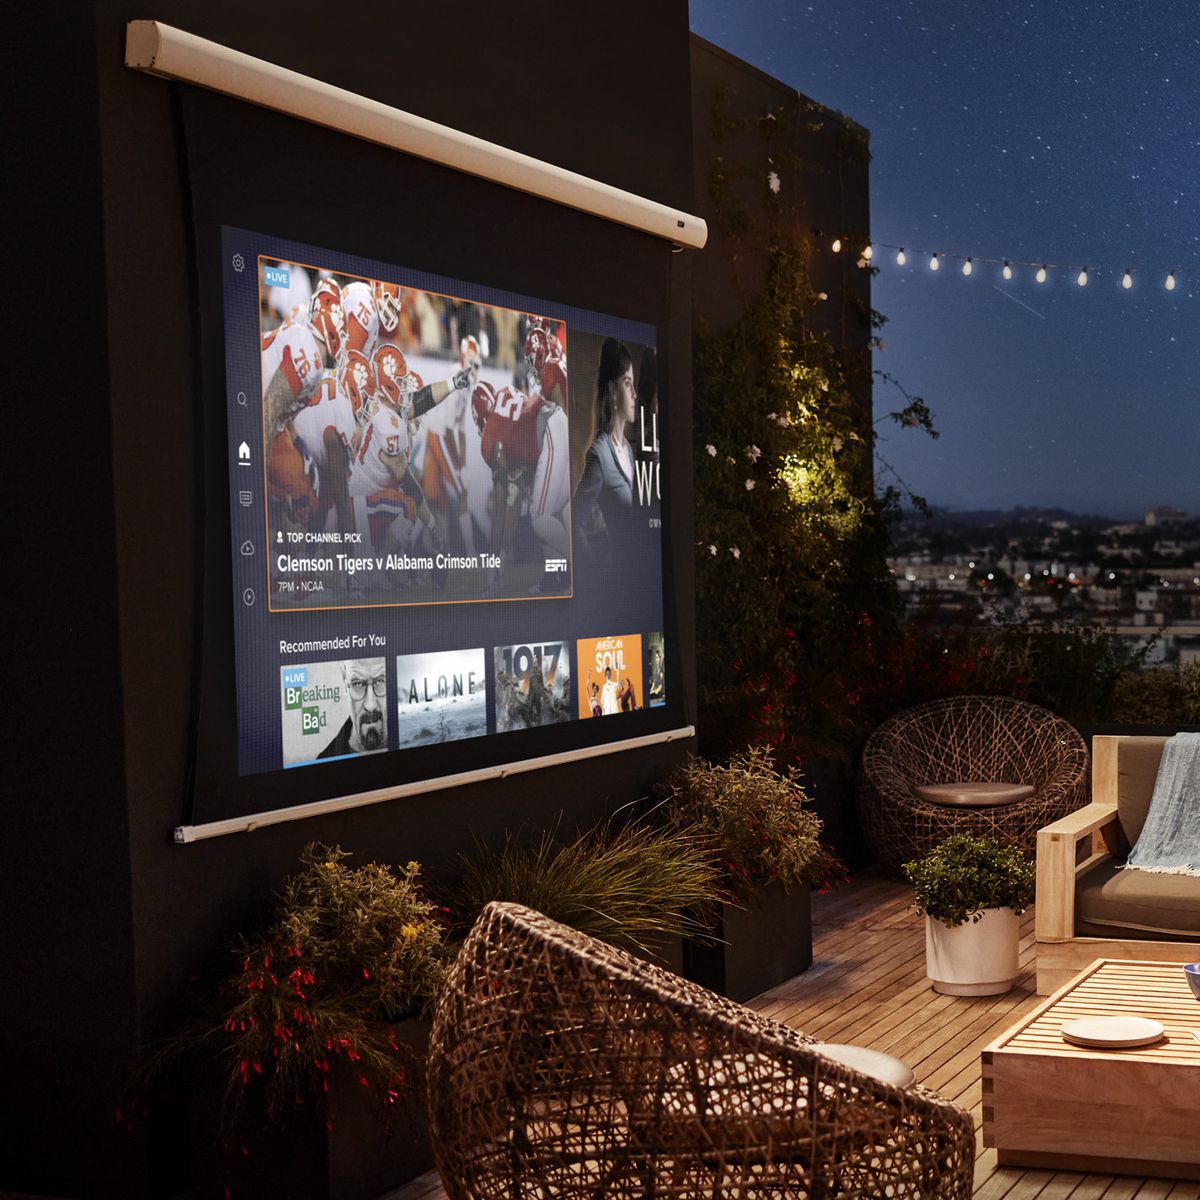 An image showing people watching Sling TV on an outdoor projector screen.